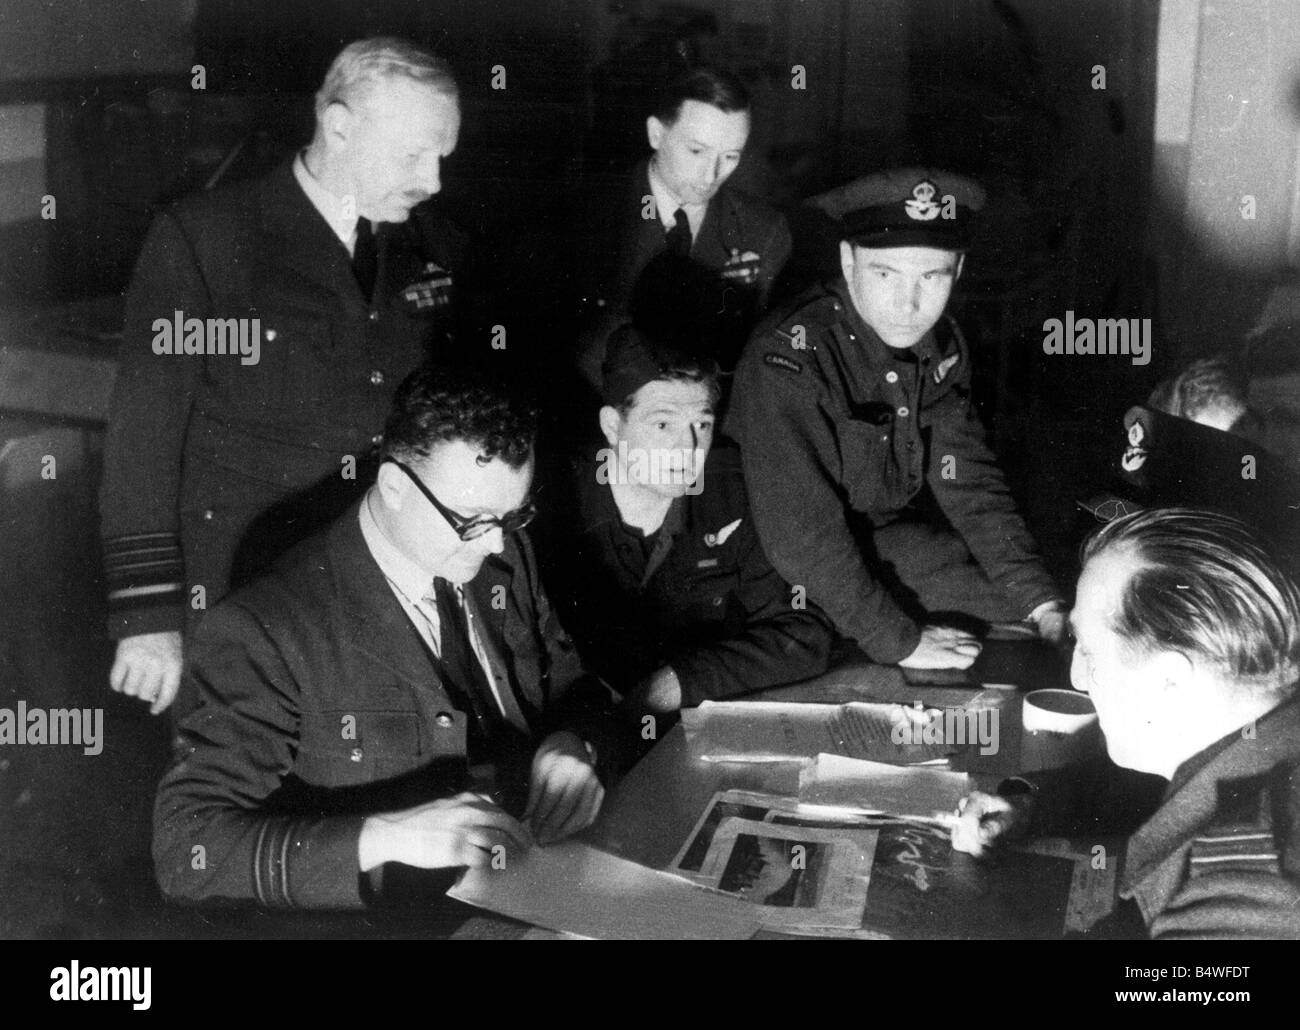 Air Officer Commander in Chief Arthur Bomber Harris standing nearest camera and Air Vice Marshal R A Cochrane listen to the interrogation of one of the crews during the RAF bombing raids on the German dams Mohne and Eder in World War Two Circa 1943 Stock Photo